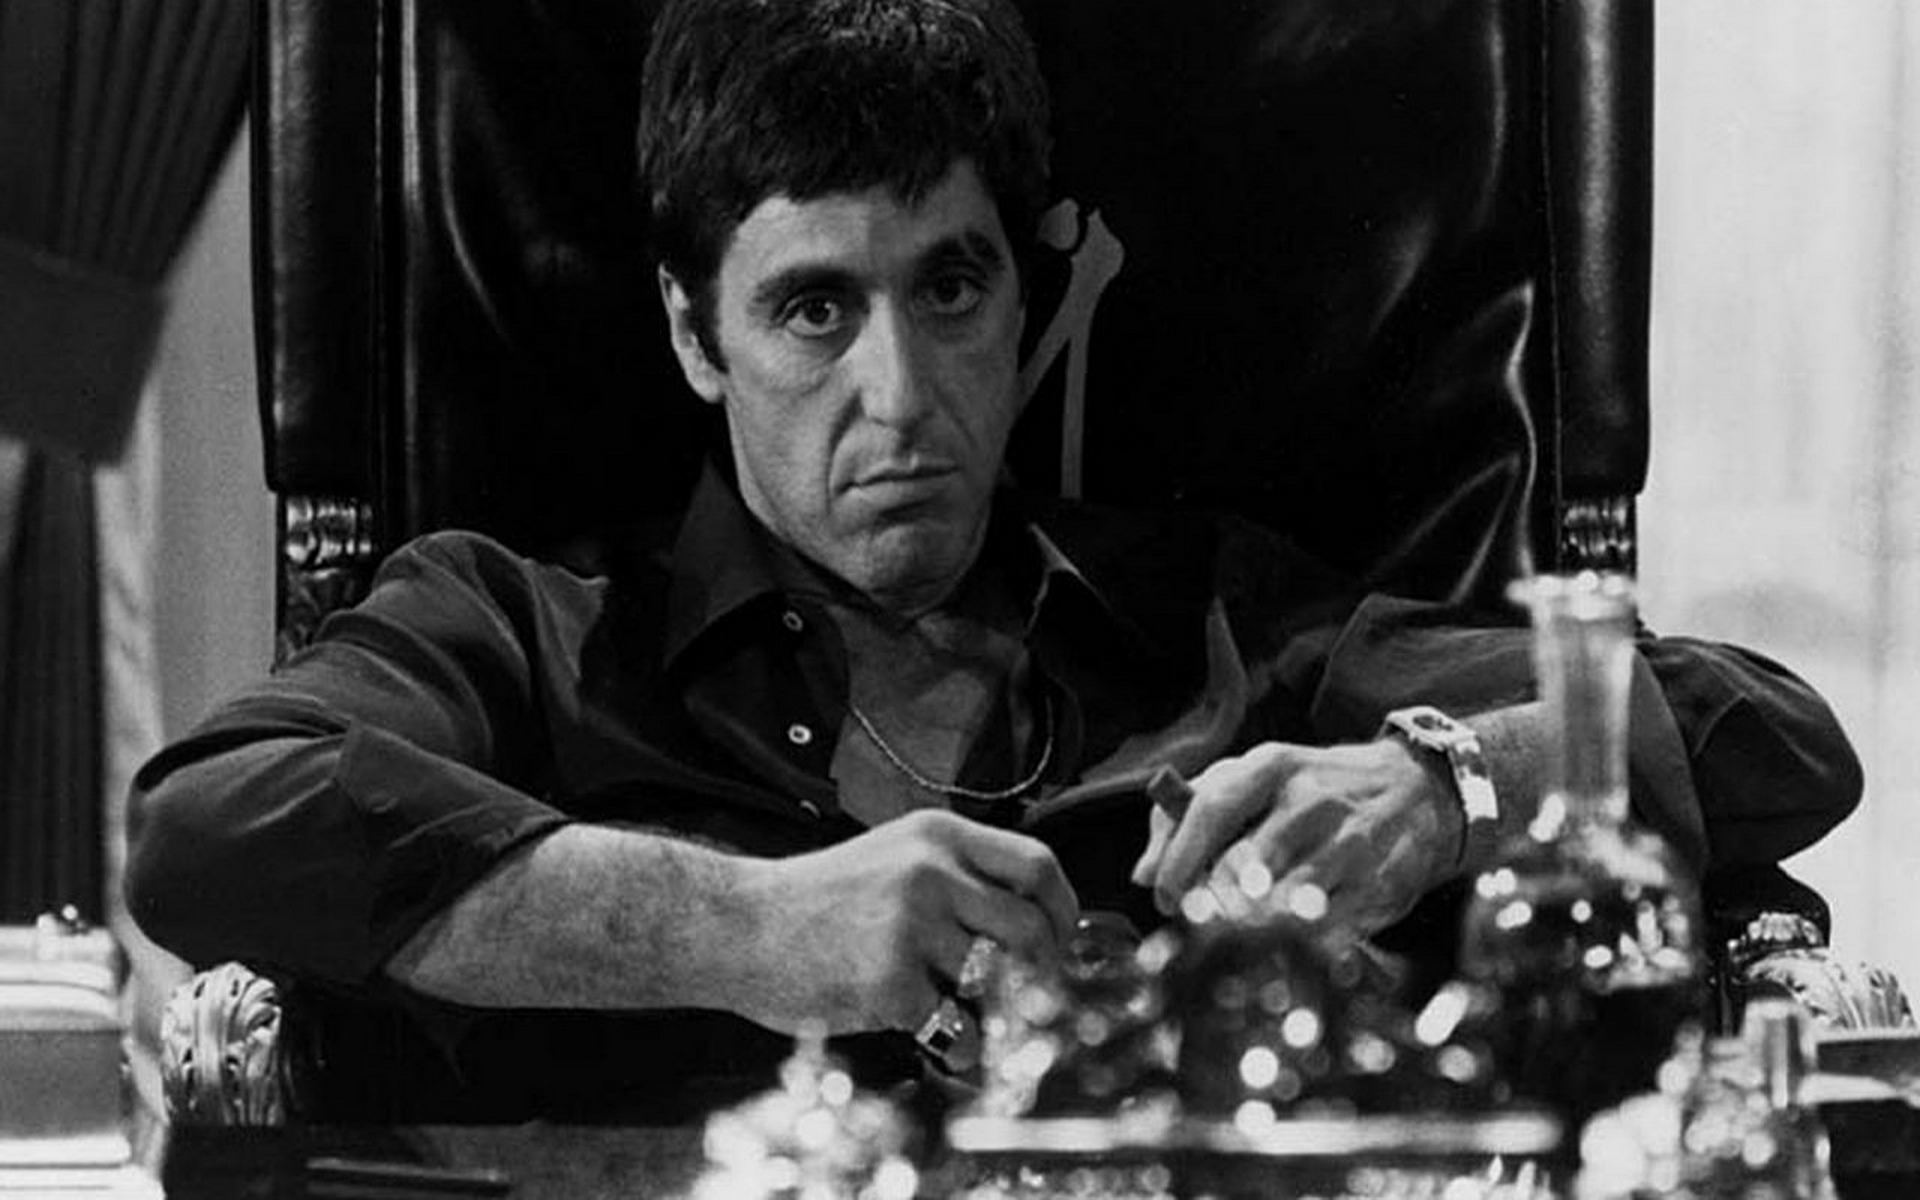 Al Pacino as Tony Montana, Scarface 1983"You're good looking, you got a beautiful body, beautiful legs, beautiful face, all these guys in love with you. Only you got a look in your eye like you haven't been fucked in a year!"